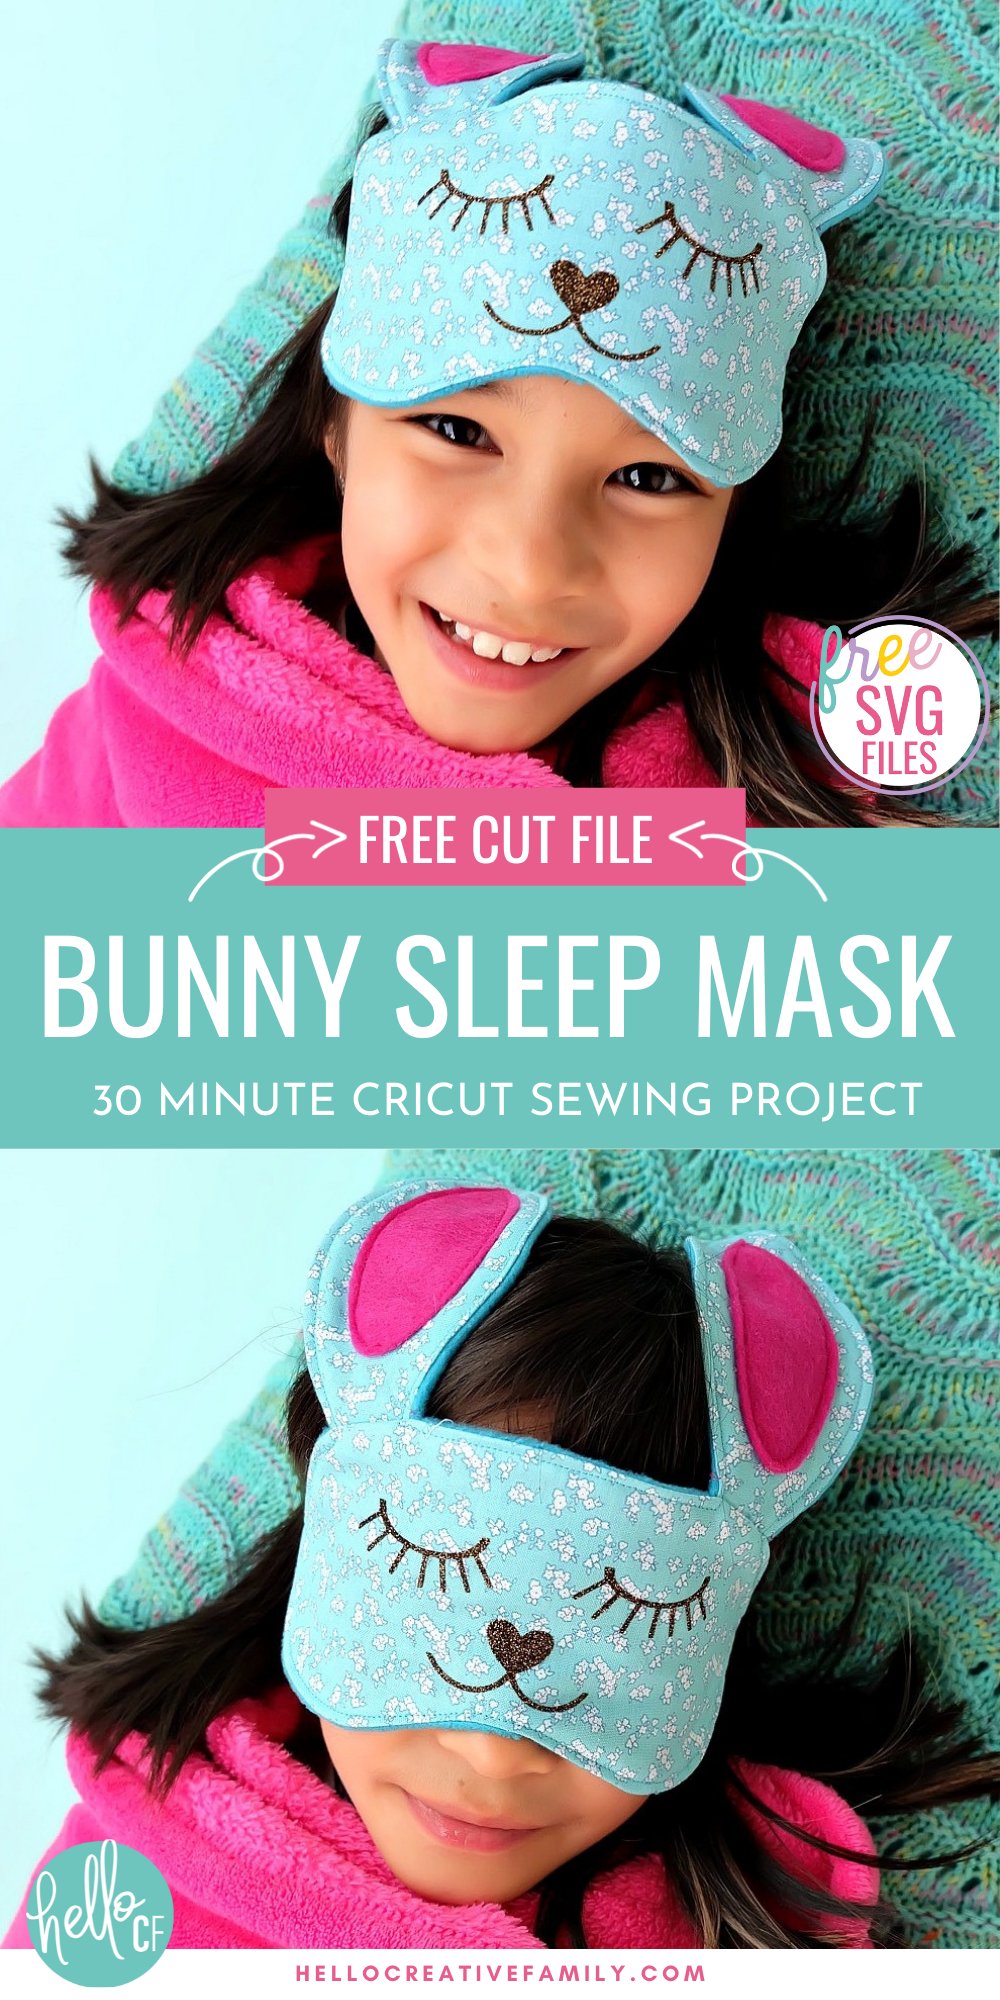 This 30 Minute Bunny Sleep Mask Sewing Tutorial is just about as cute as can be! Its easy to make and would make an adorable handmade gift idea for teens or tweens and would be perfect for birthday party or slumber party favors! Free cut file provided using the Cricut Maker or Cricut Explore. I have to make this Cricut project next! #CricutMade #CricutMaker